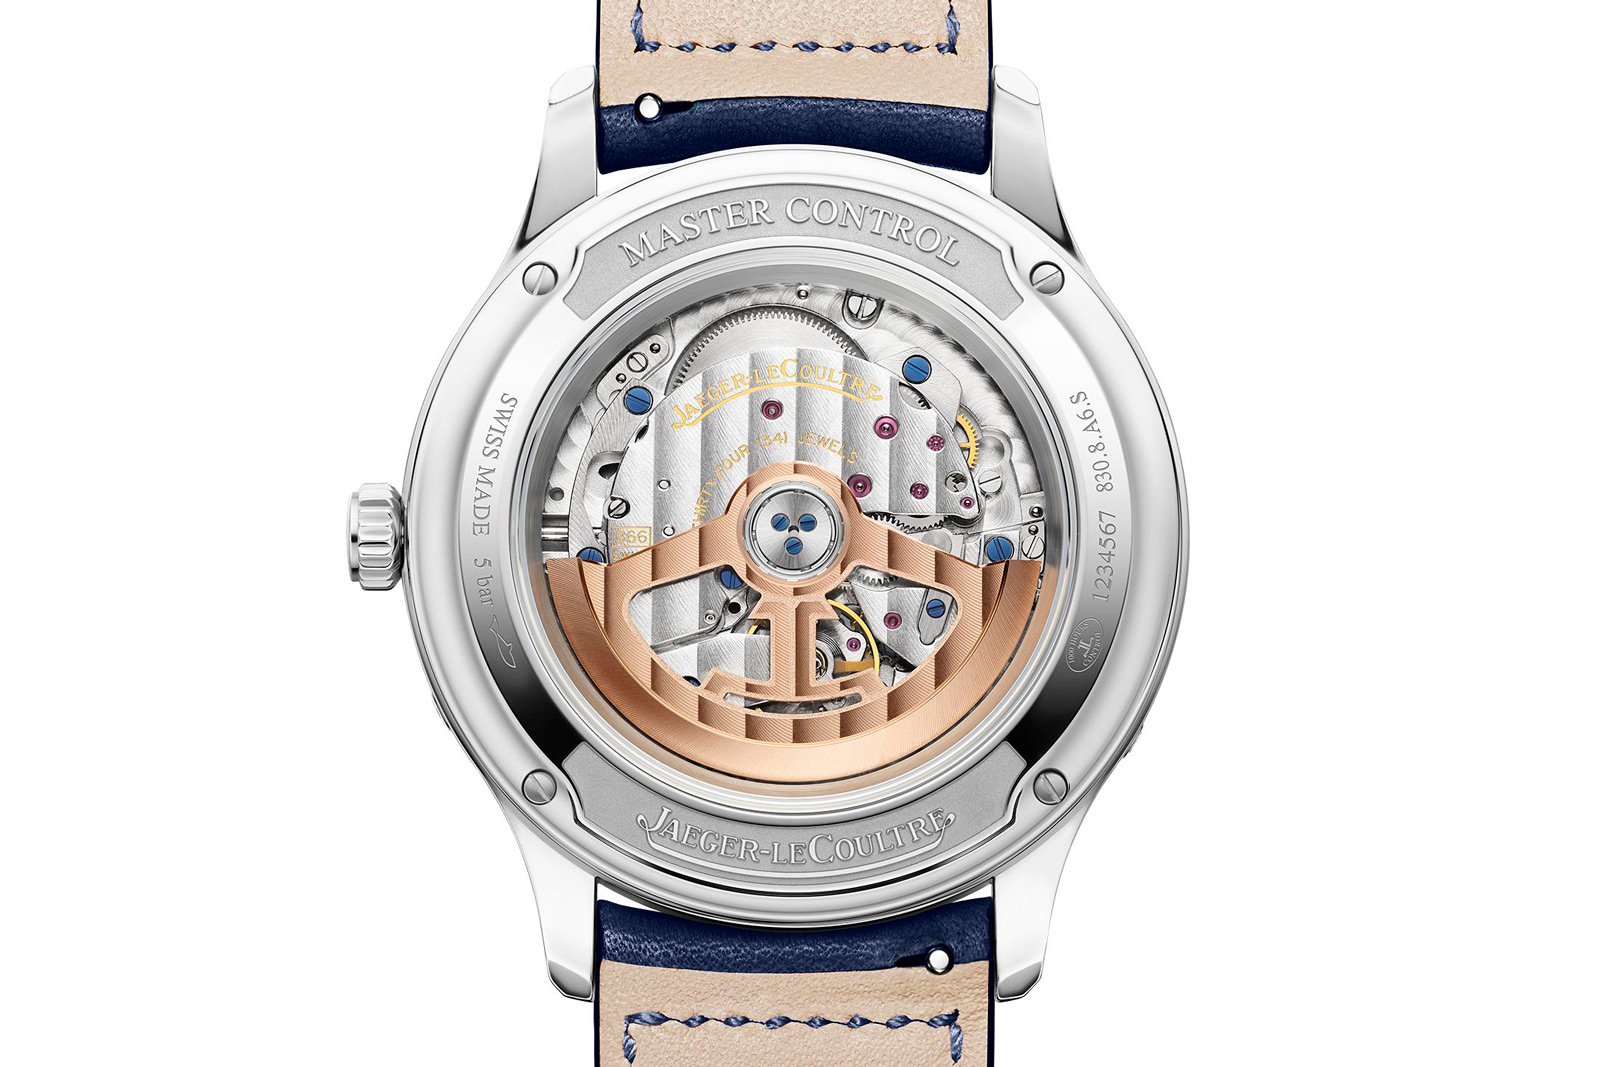 Jaeger-LeCoultre Introduces the Master Control in Blue | SJX Watches